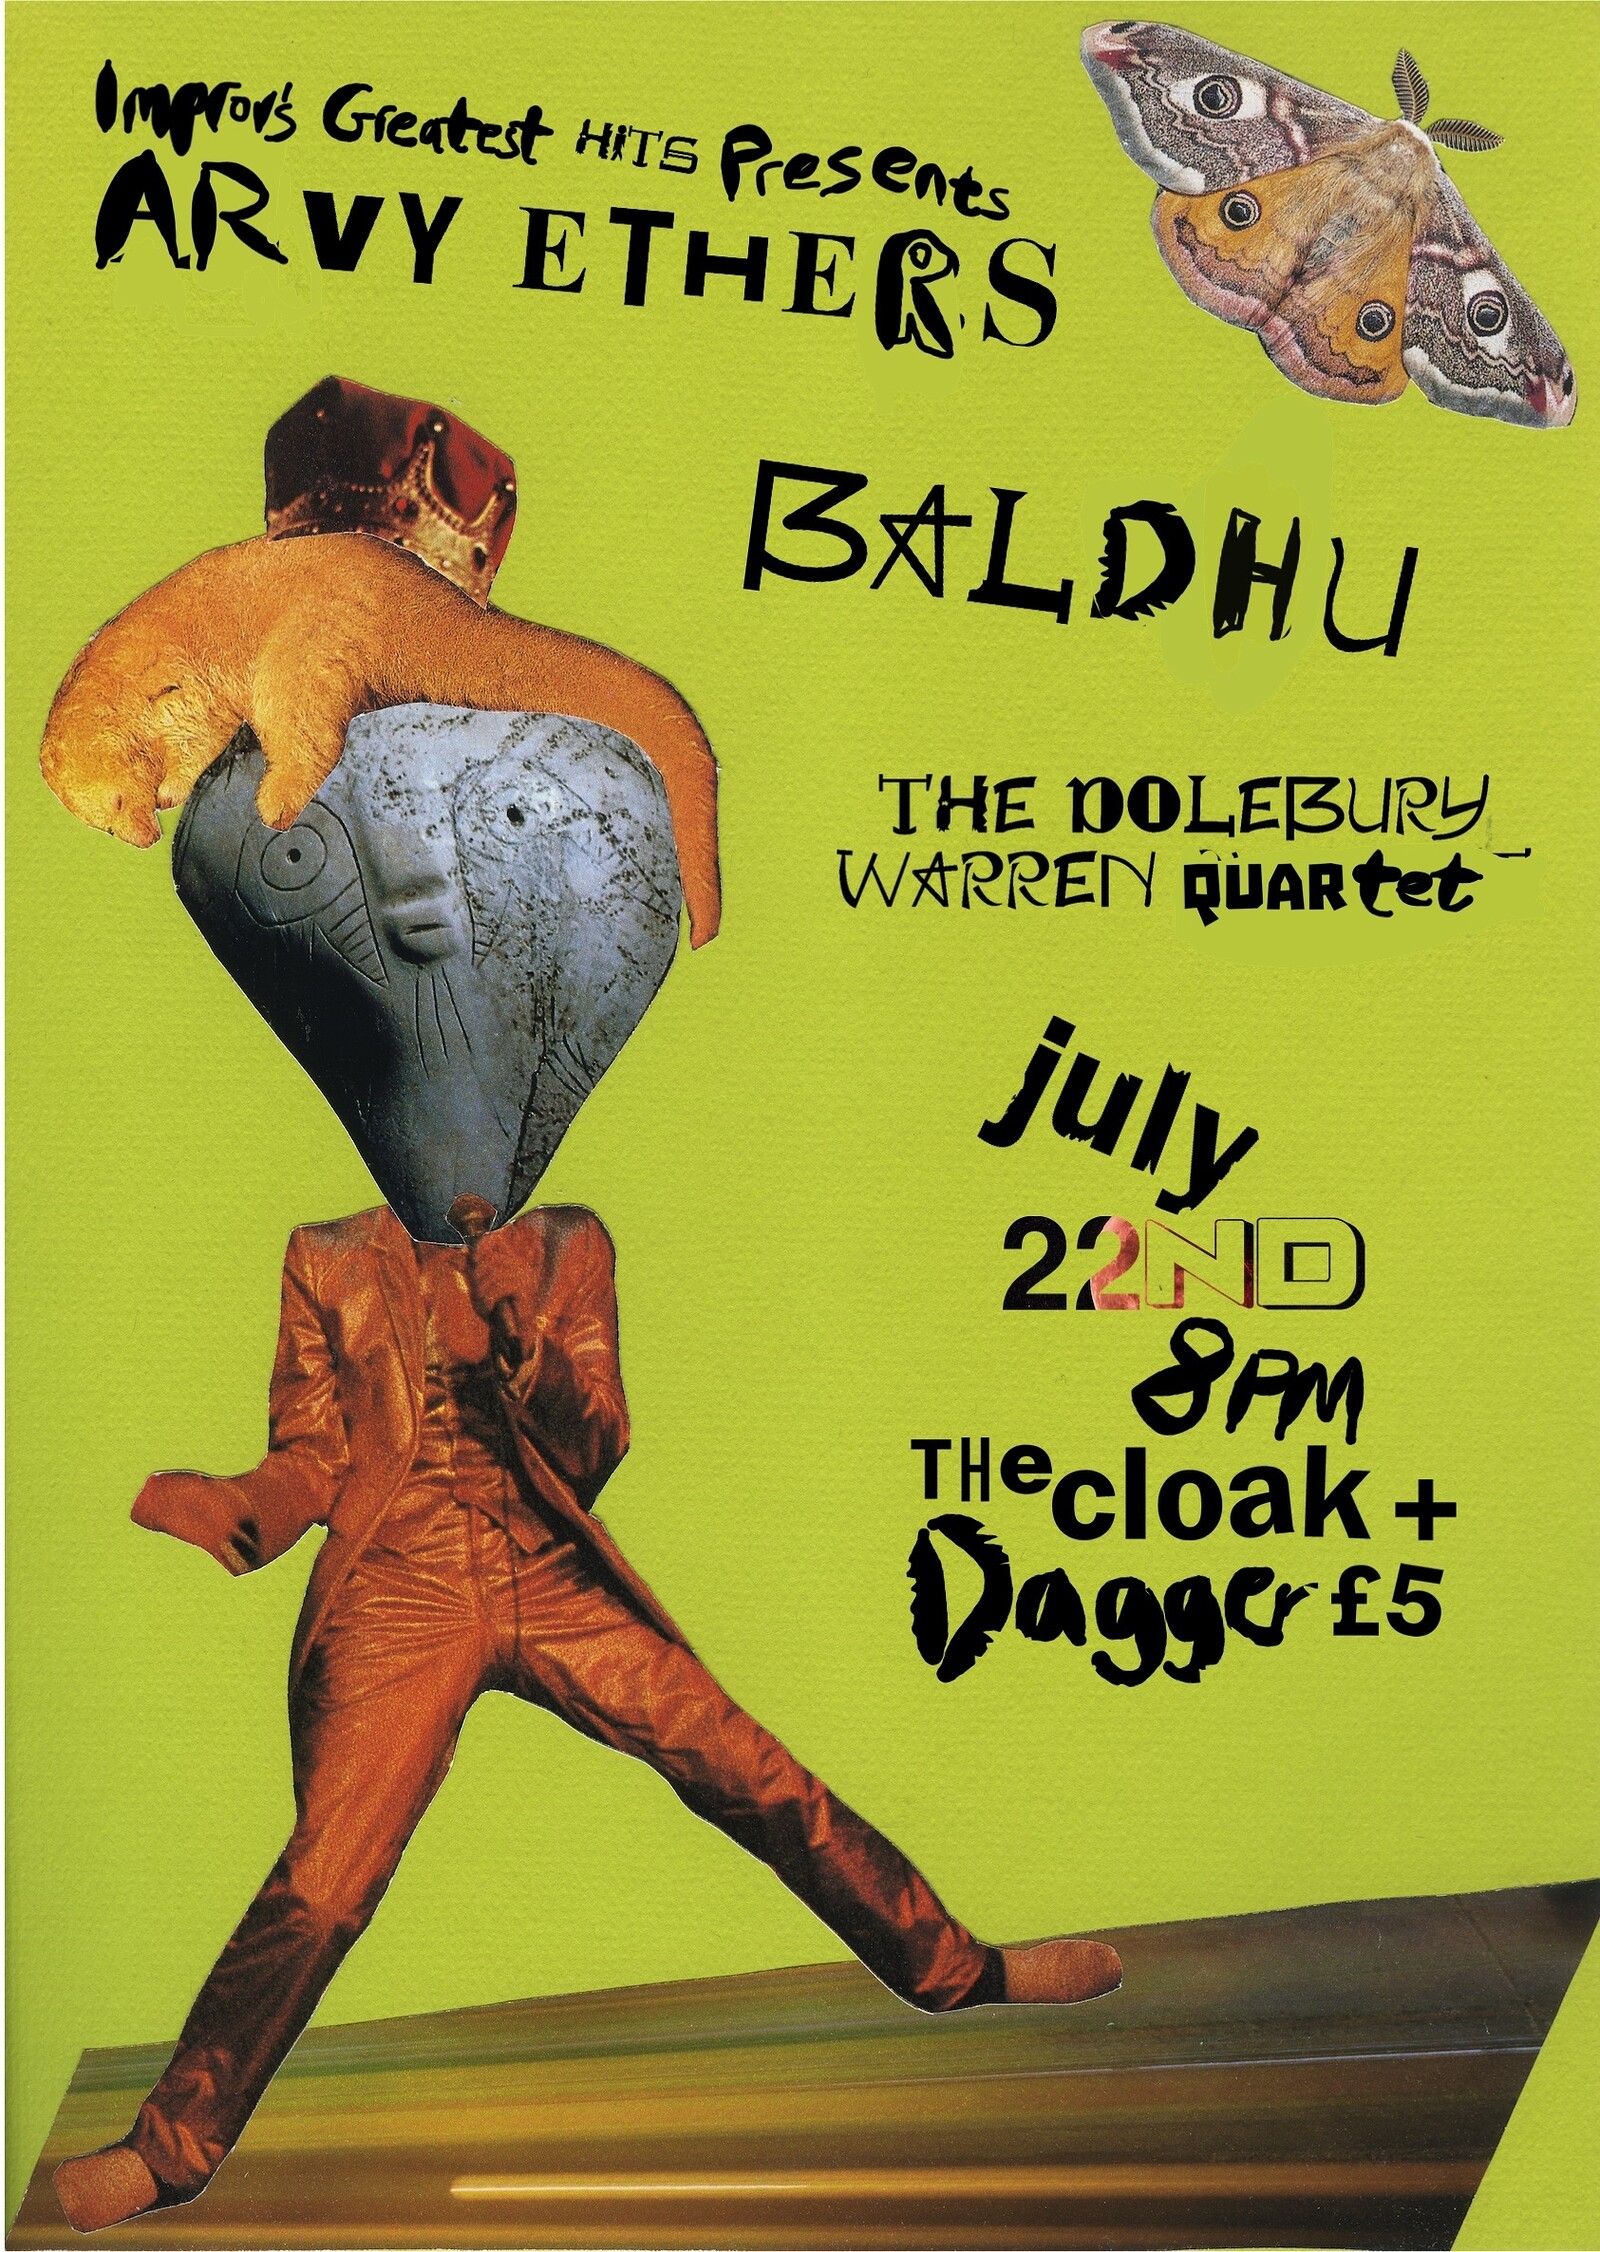 Arvy Ethers & Baldhu at The Cloak and Dagger